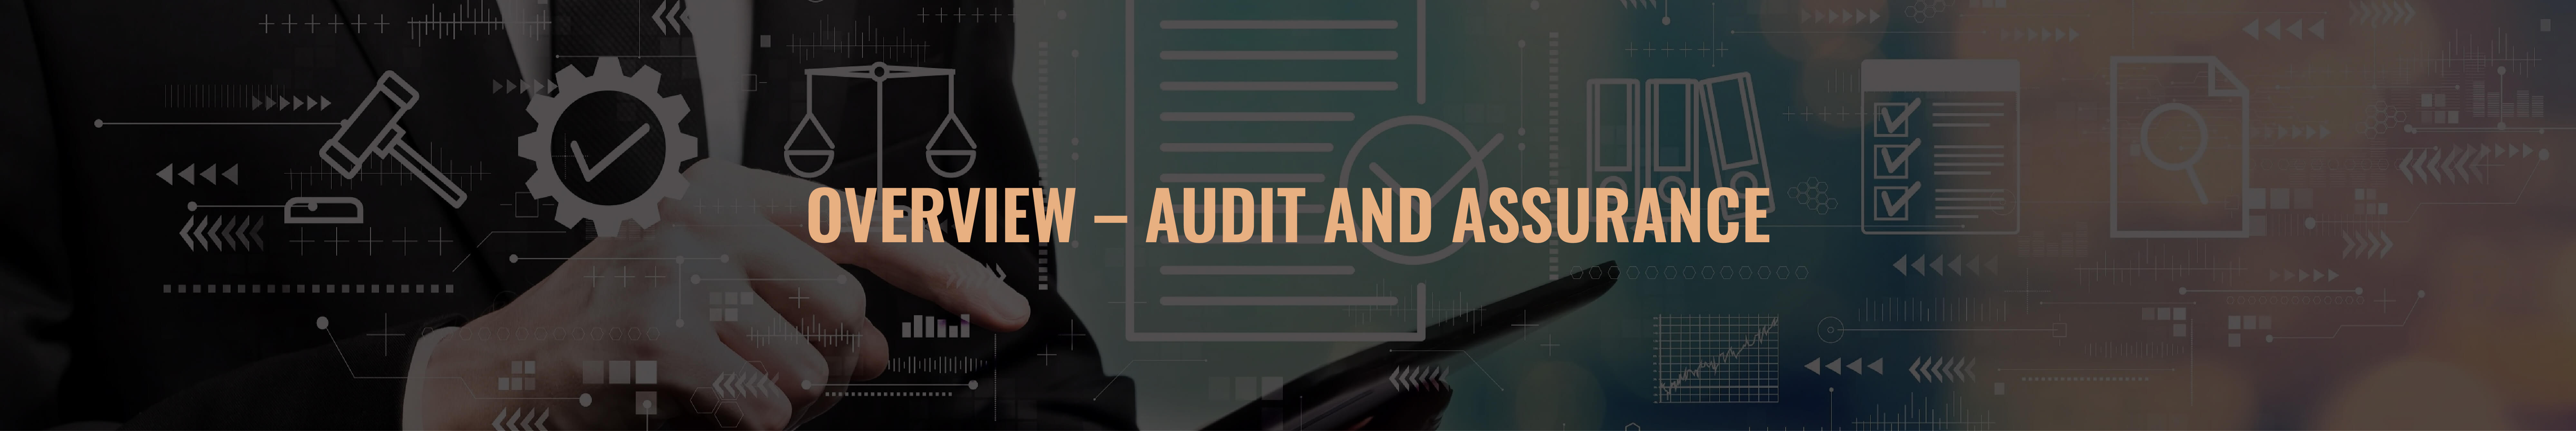 Audit and Assurance - Overview